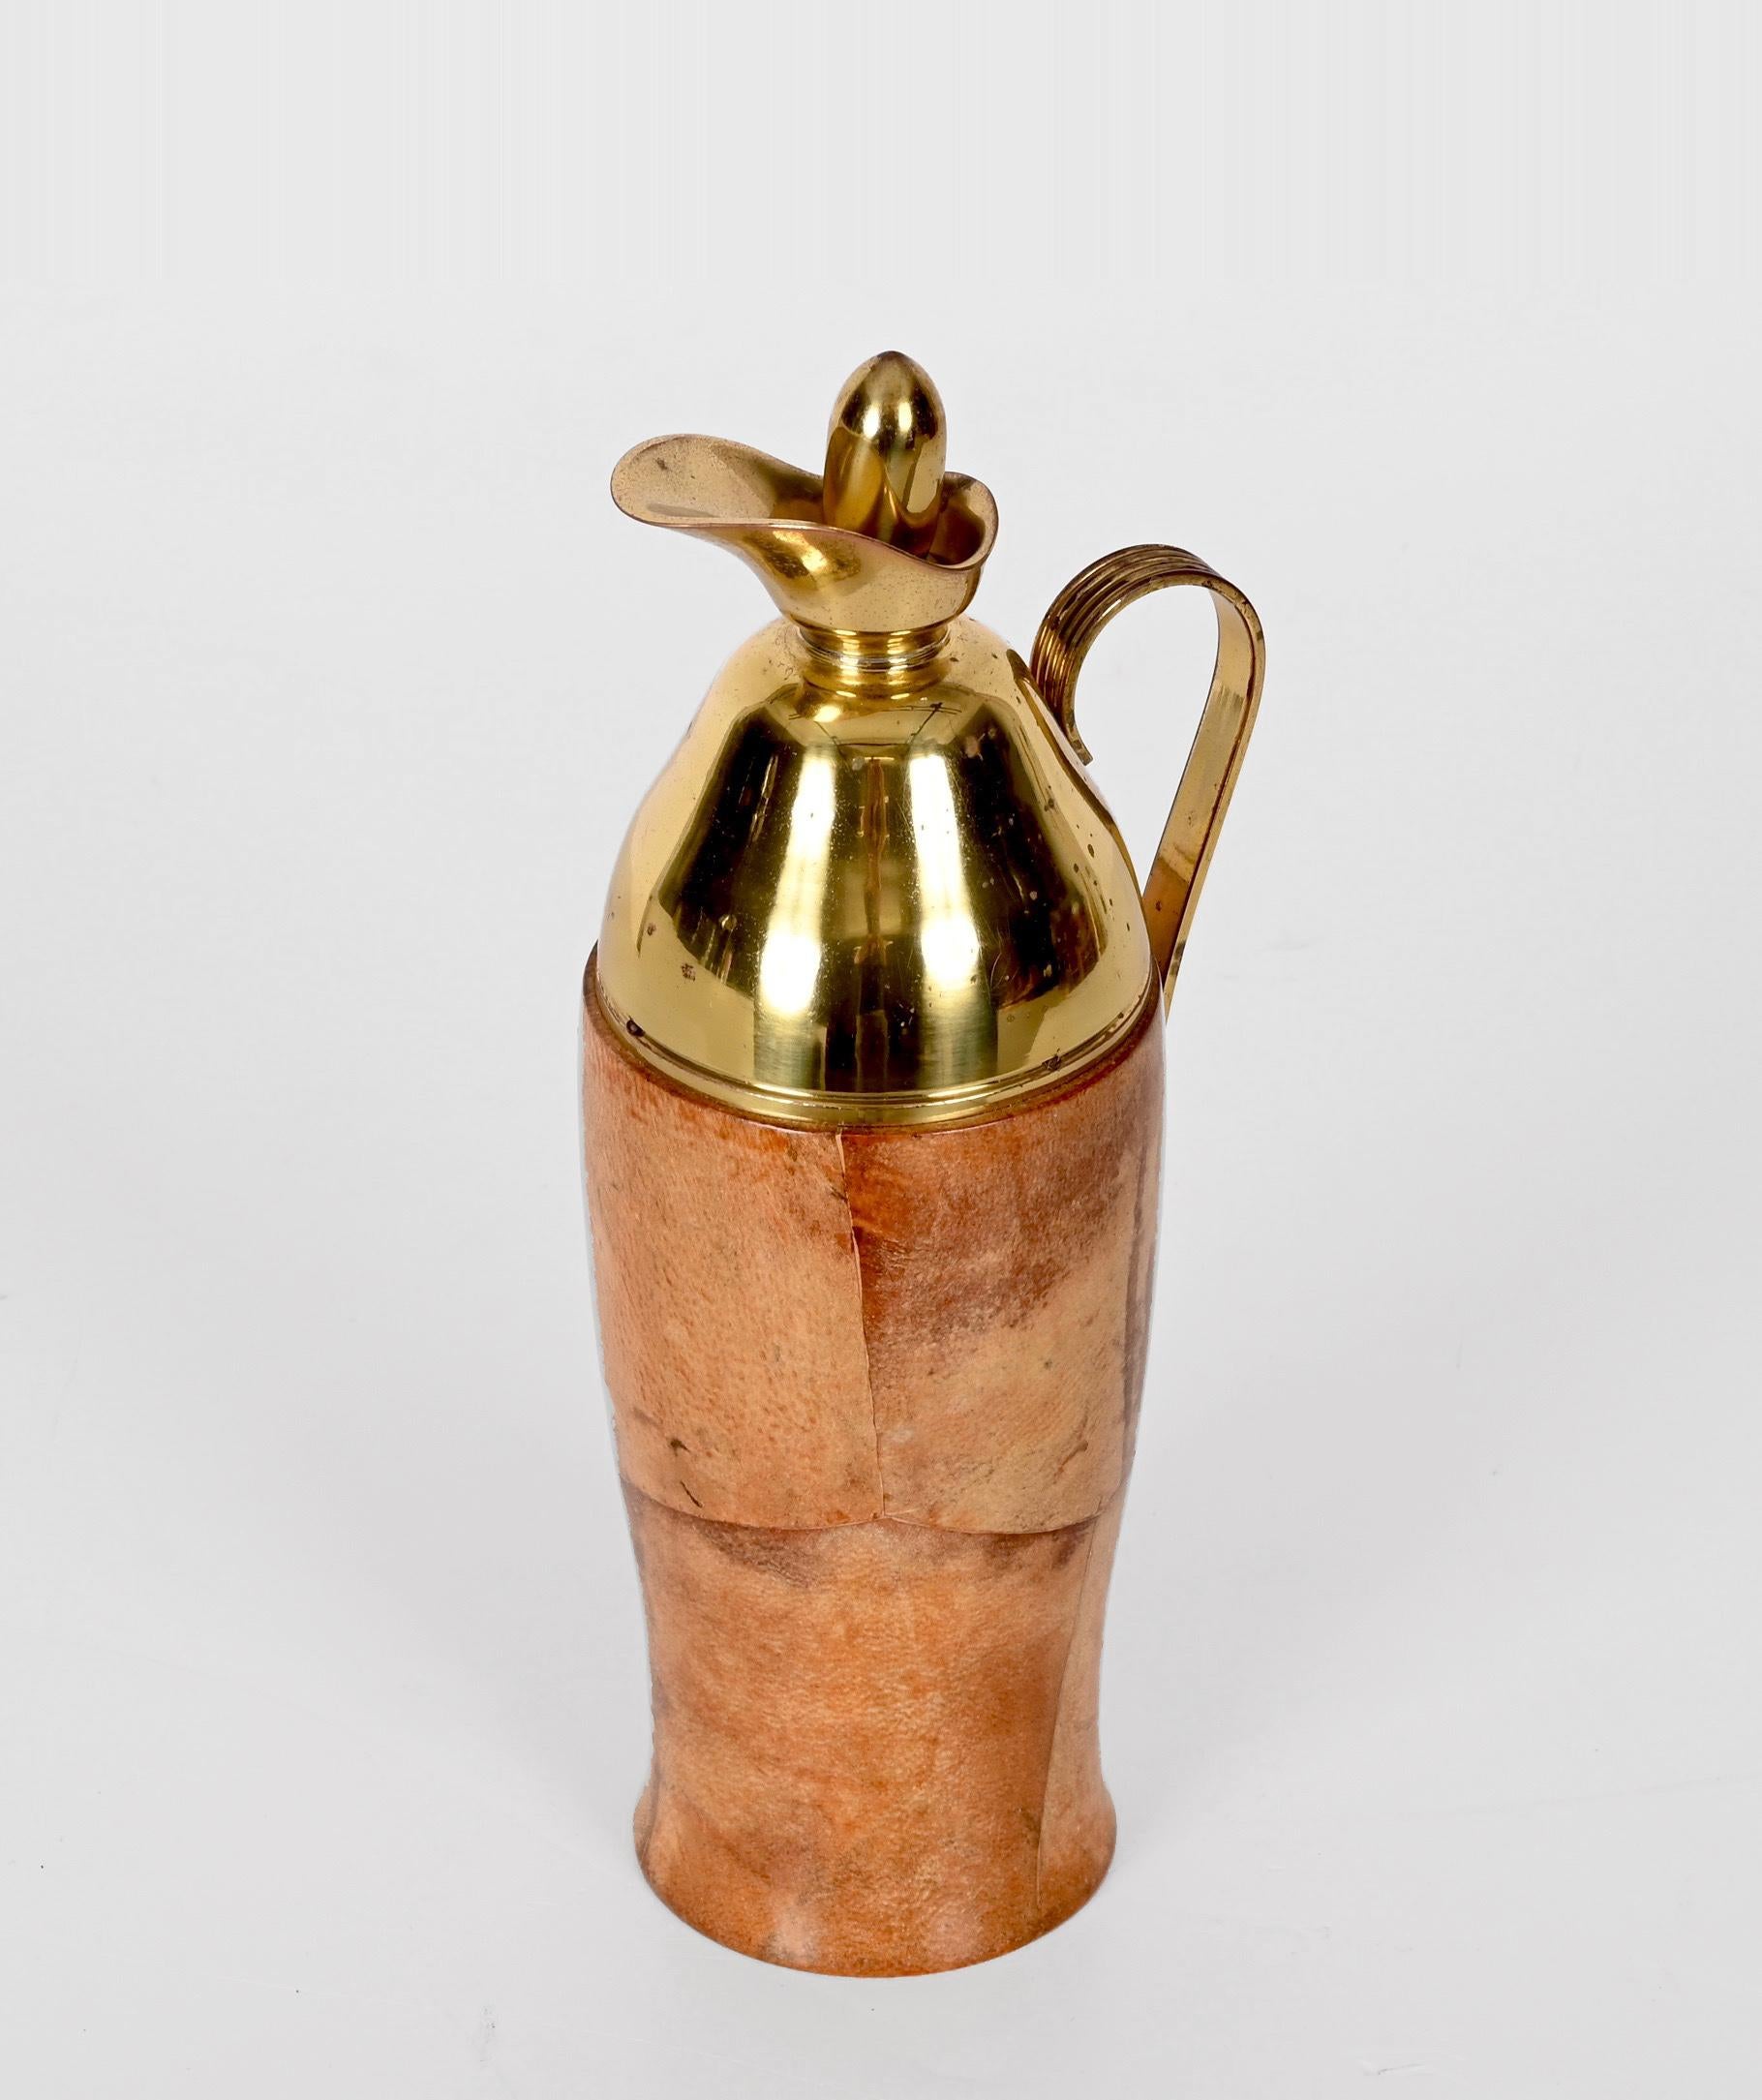 Amazing wooden goatskin thermos decanter with mid-century gilt brass trim. Aldo Tura produced this wonderful item in Milan, Italy, during the 1950s for a Macabo production.

The piece shows fantastic craftsmanship as the outer and insulating